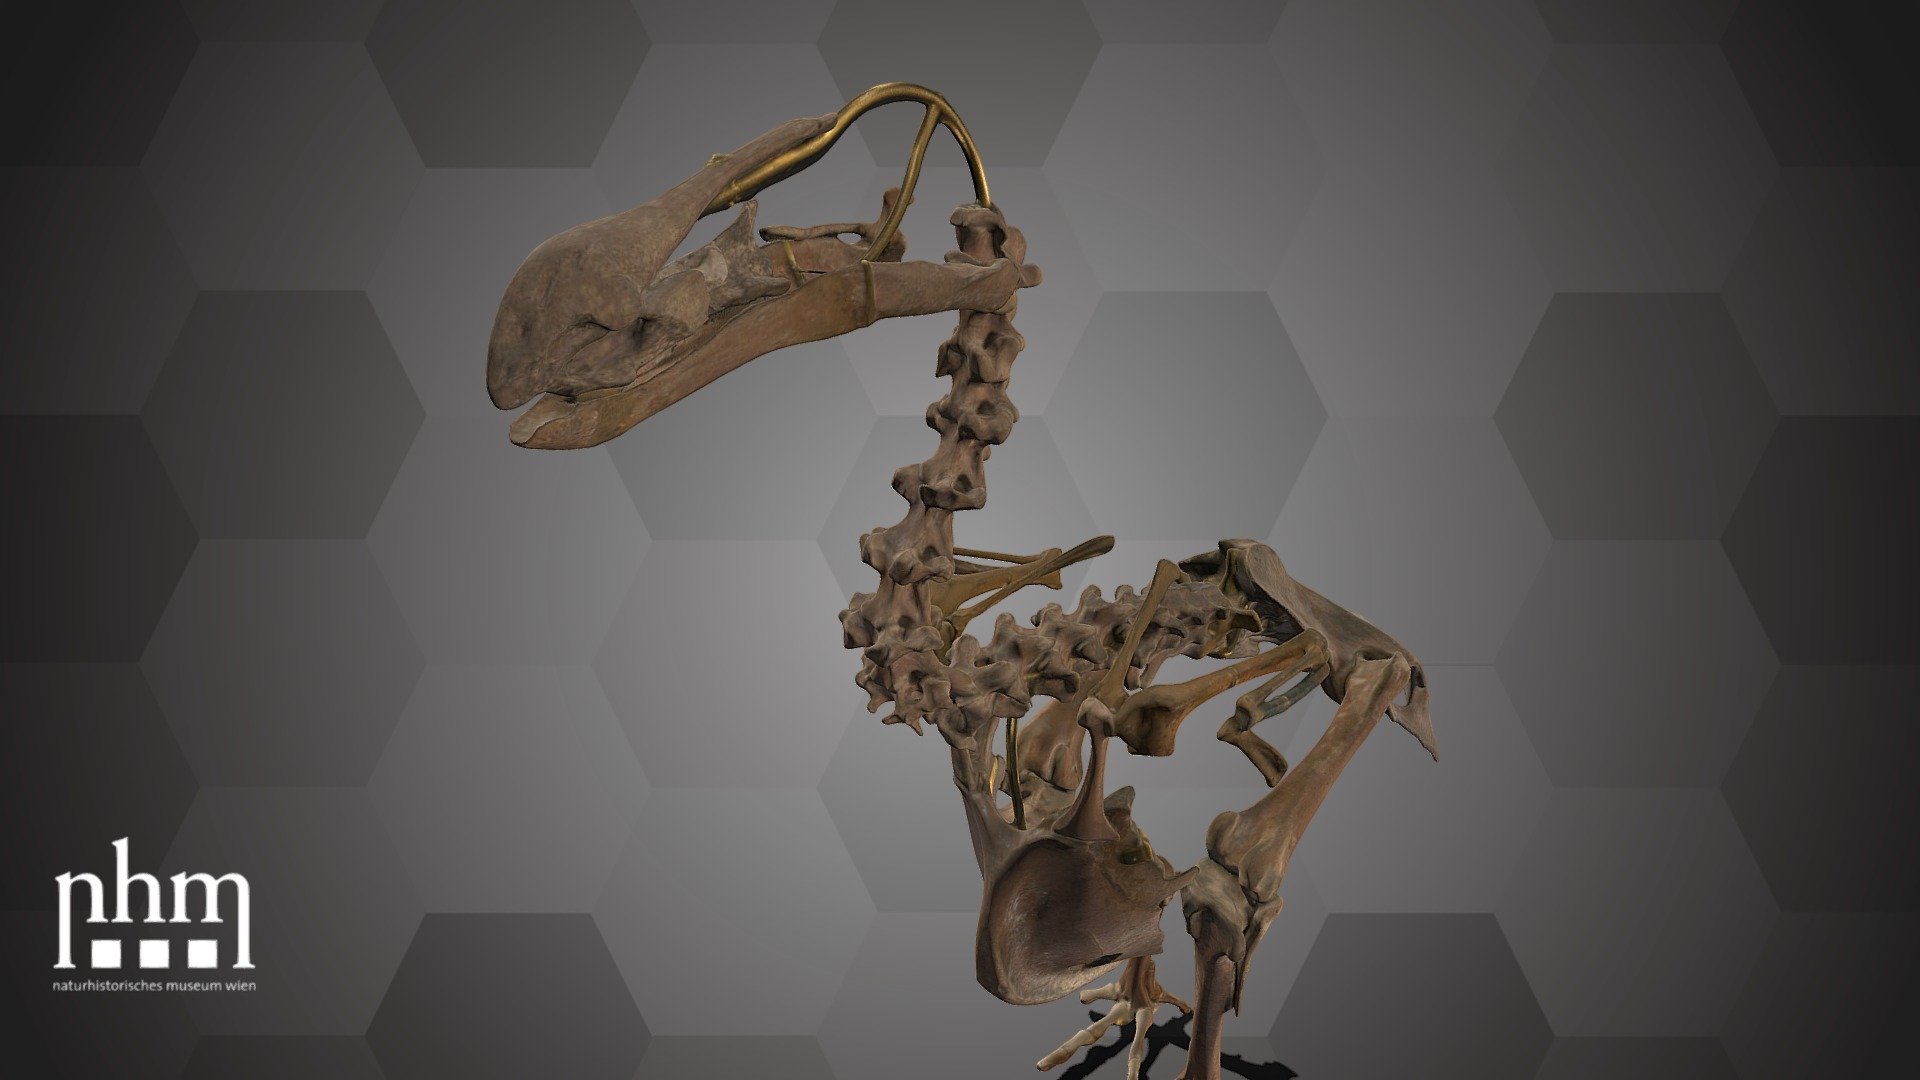 3D scan of a dodo skeleton. This specimen probably was put together from the remains of several birds. There is no complete dodo skeleton left, nevertheless the NHM Vienna owns one of the most complete skeletons. Dodos lived exclusively on the islands of Mauritius and Reunion. The last dodo probably went extinct about 1690.

The dodo is Number 80 of the NHM Top 100 and can be found in Hall 31 of the NHM Vienna.

Specimen: Raphus cucullatus (Linnaeus, 1758)

Inventory number: NHMW-Zoo-VS 1.471

Collection: Natural History Museum Vienna, 1st Zoological Dept., Bird Coll. (curator: Swen Renner)

Find out more about the NHMW here.

Scanned and edited by Emil Fitzenreiter &amp; Anna Haider (NHMW)

Scanner: Artec Leo. Infrastructure funded by the FFG 3d model